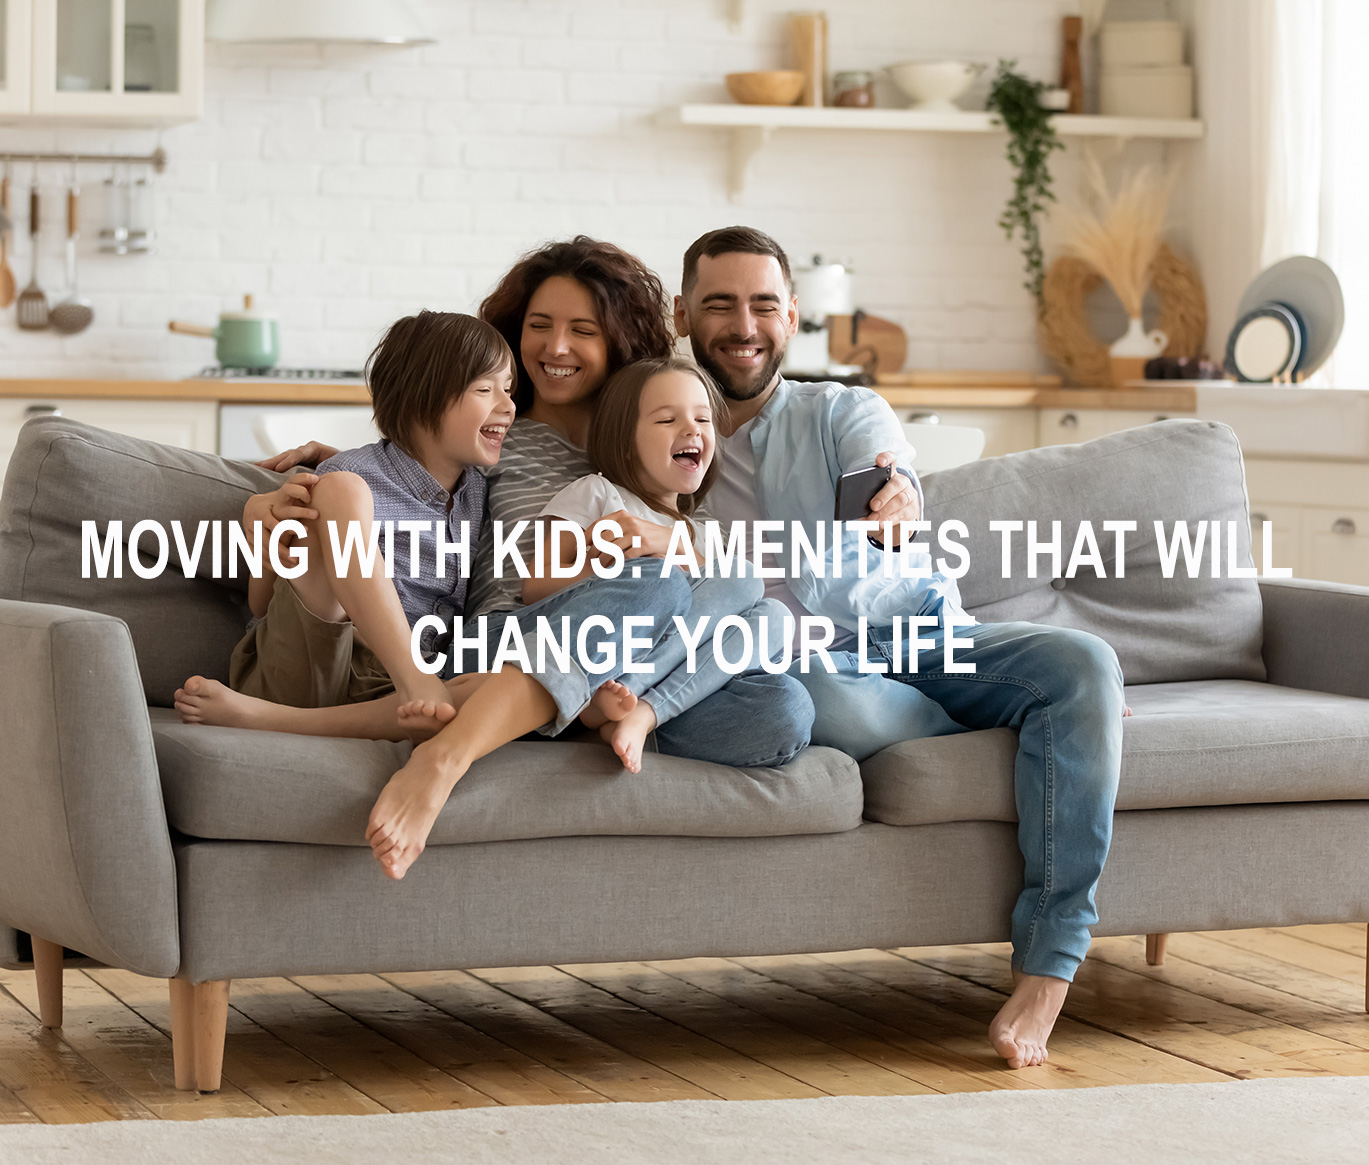 Moving with kids: amenities that will change your life